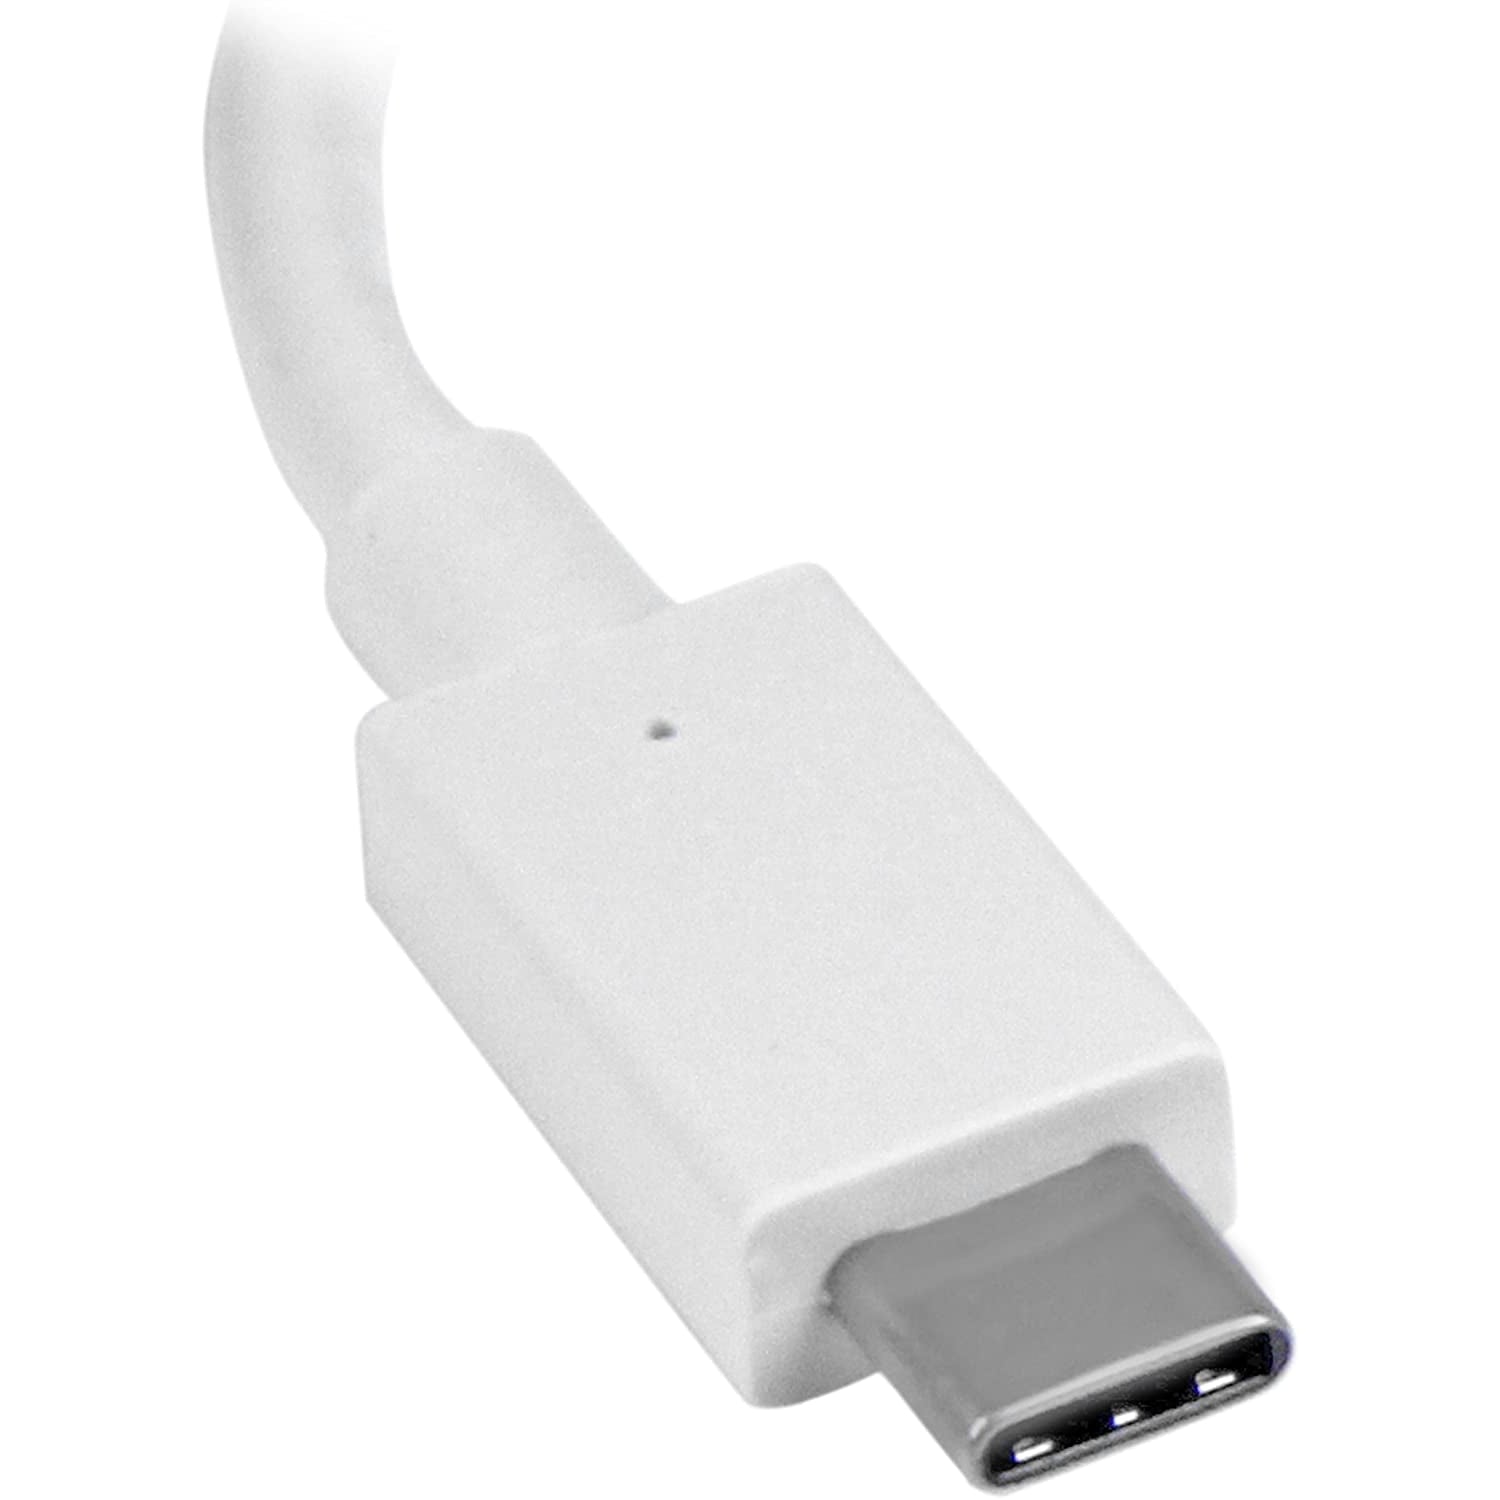 StarTech.com USB C to HDMI Adapter - 4K 30Hz - USB 3.1 Type-C to HDMI Adapter, White